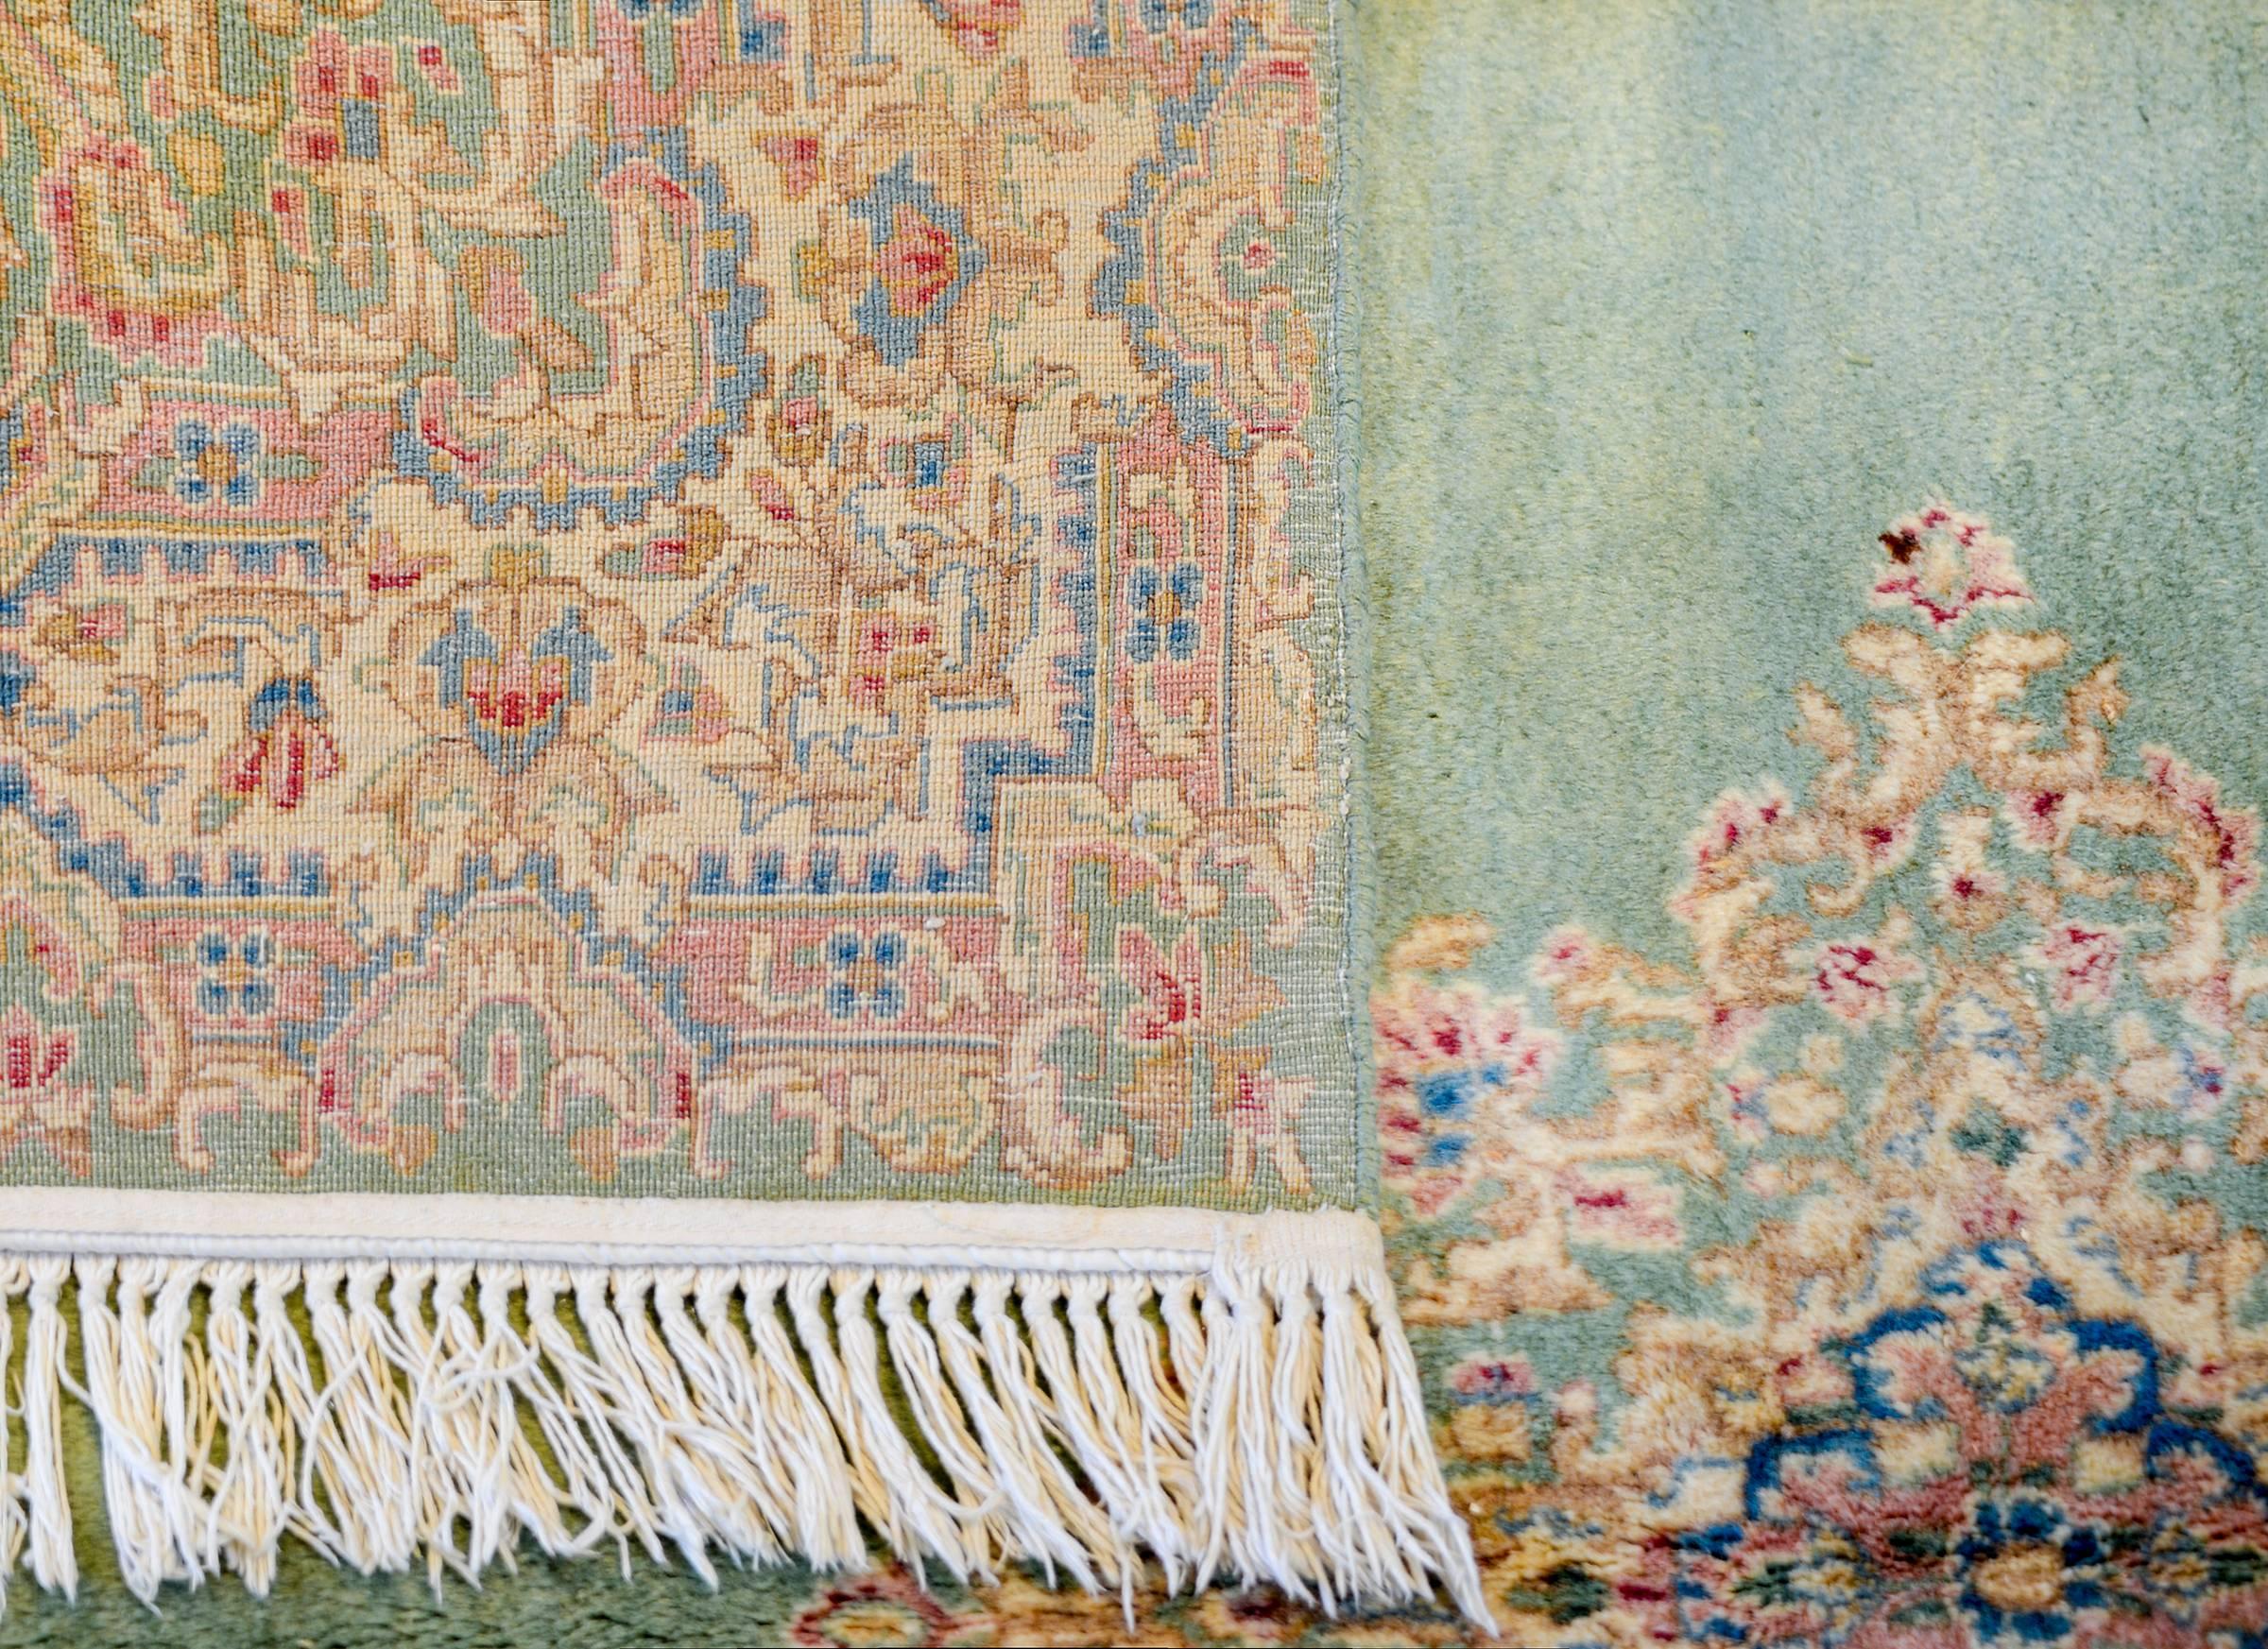 An amazing early 20th century Persian square Kirman rug woven with an incredibly high quality shimmering silky vegetable dyed wool with a large floral diamond medallion living on a sage green background surrounded by a fantastic baroque floral